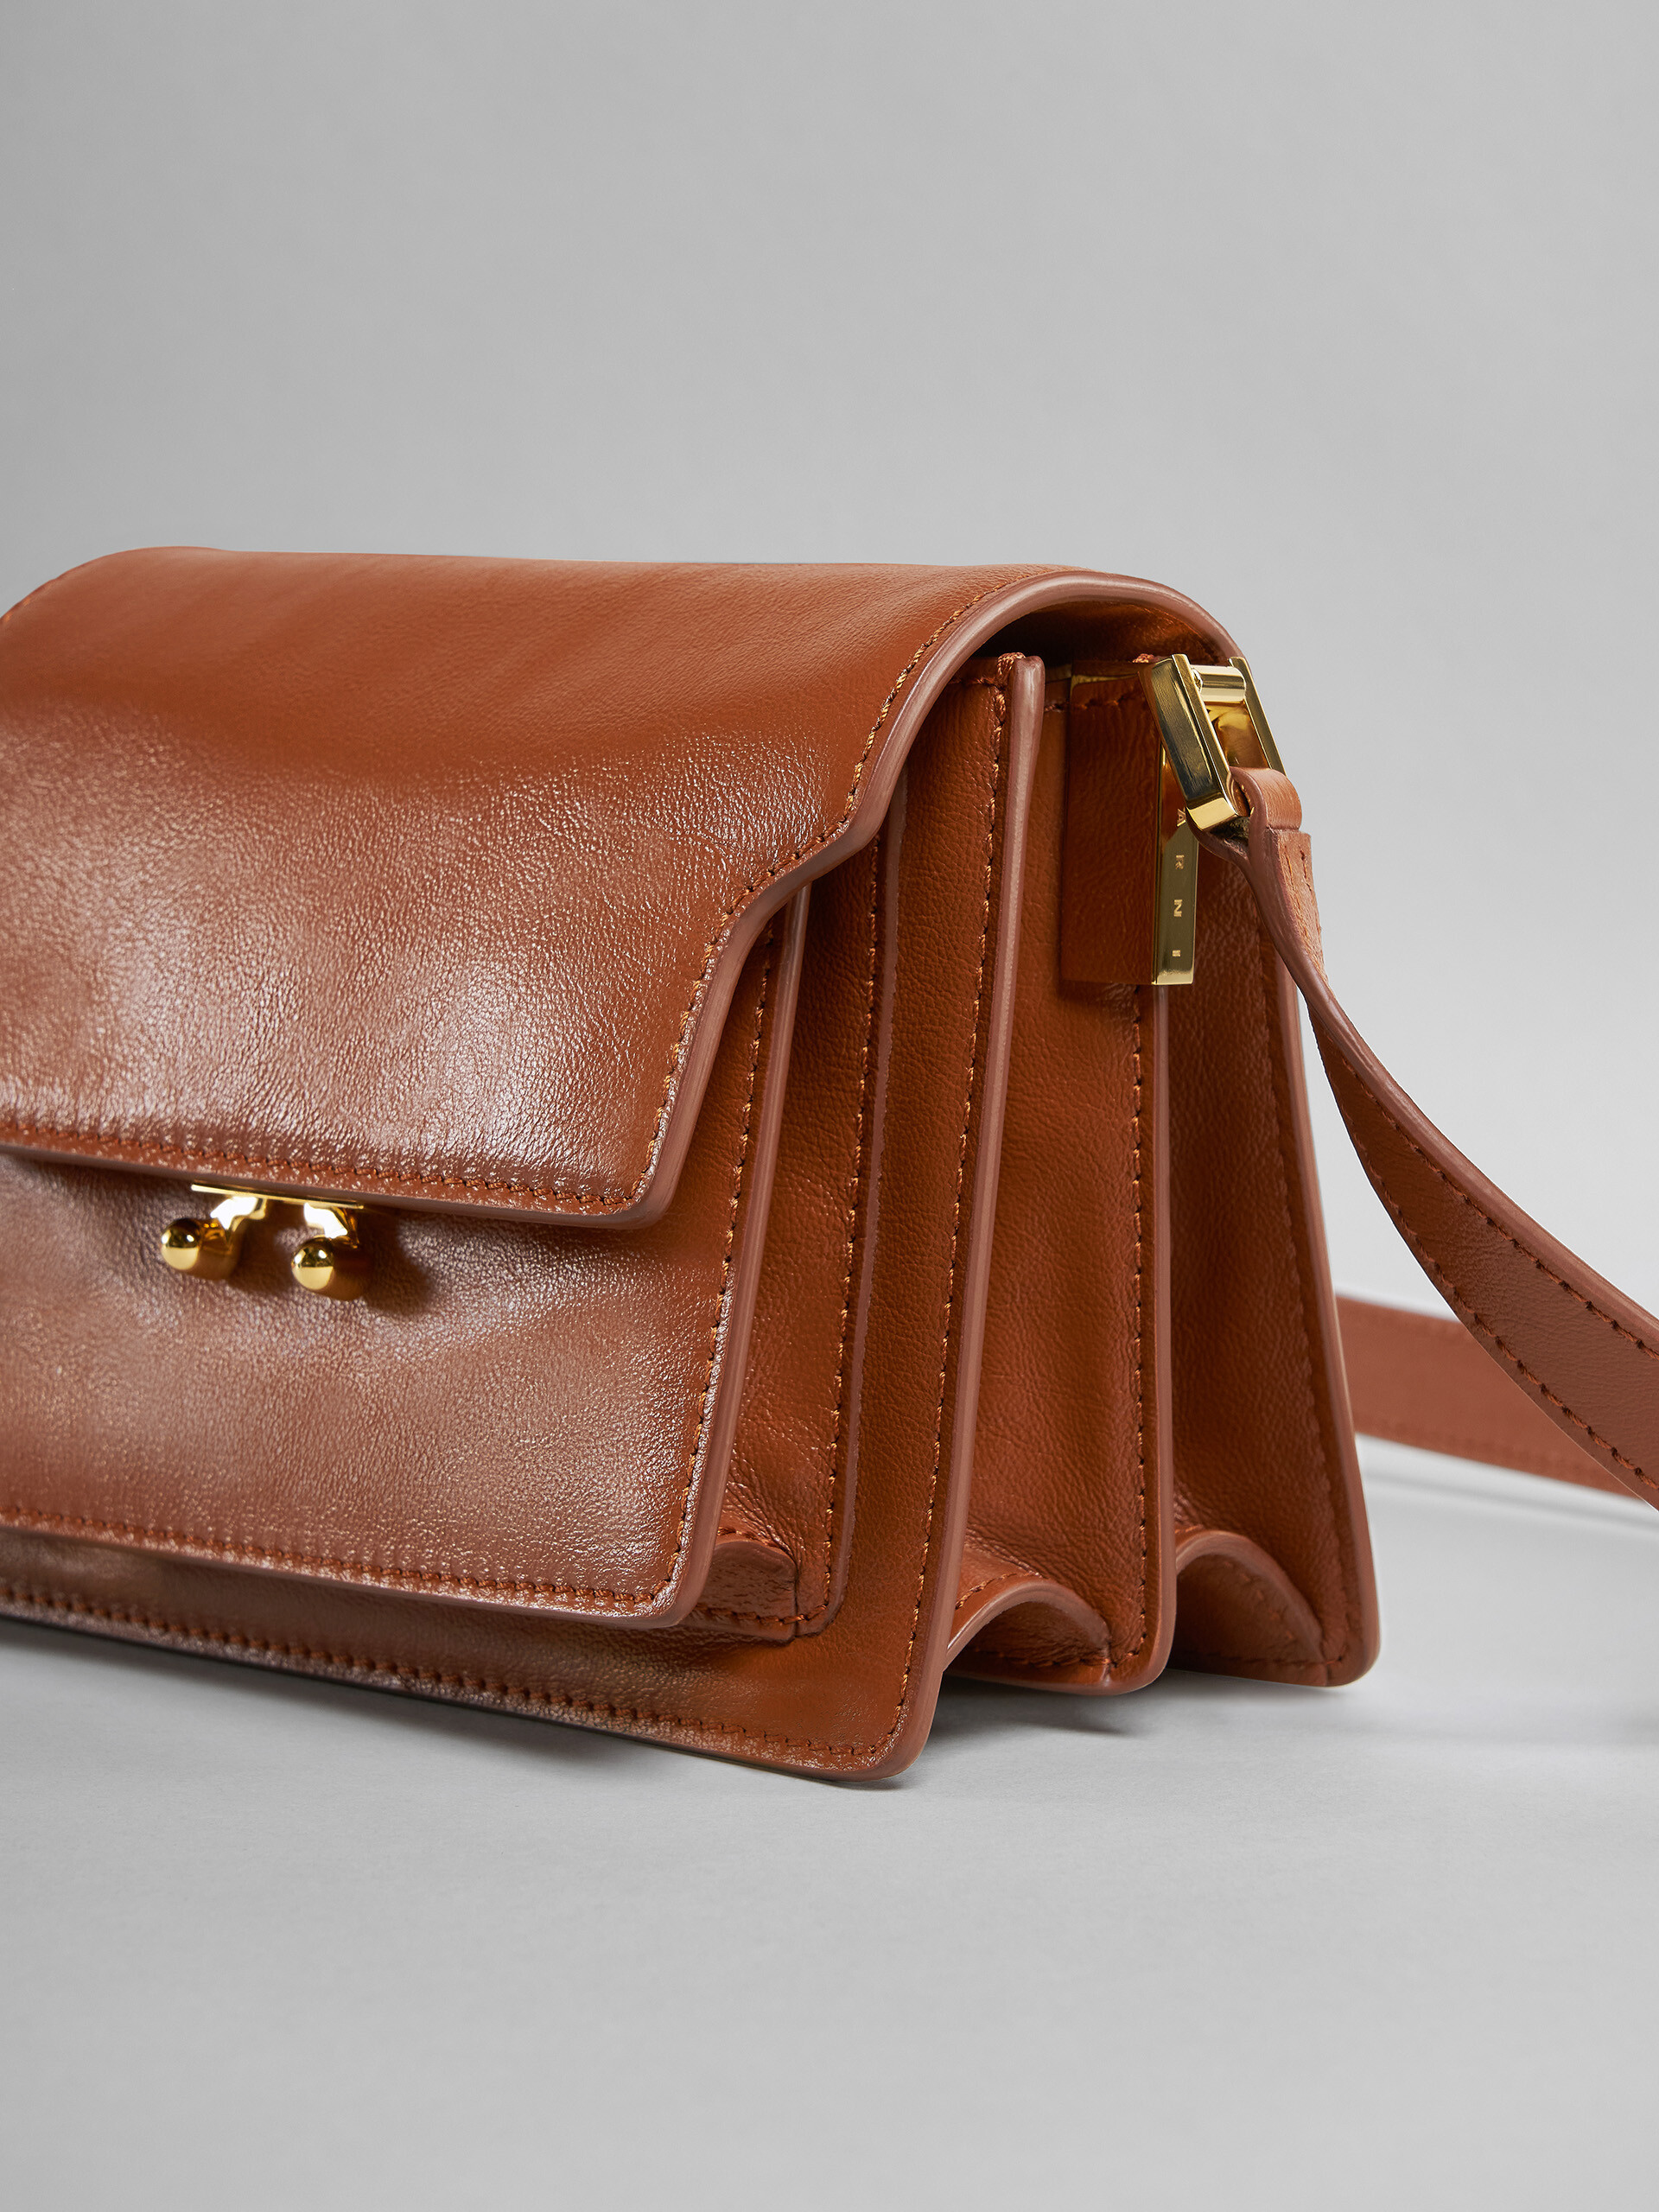 TRUNK SOFT mini bag in brown leather - Shoulder Bags - Image 5